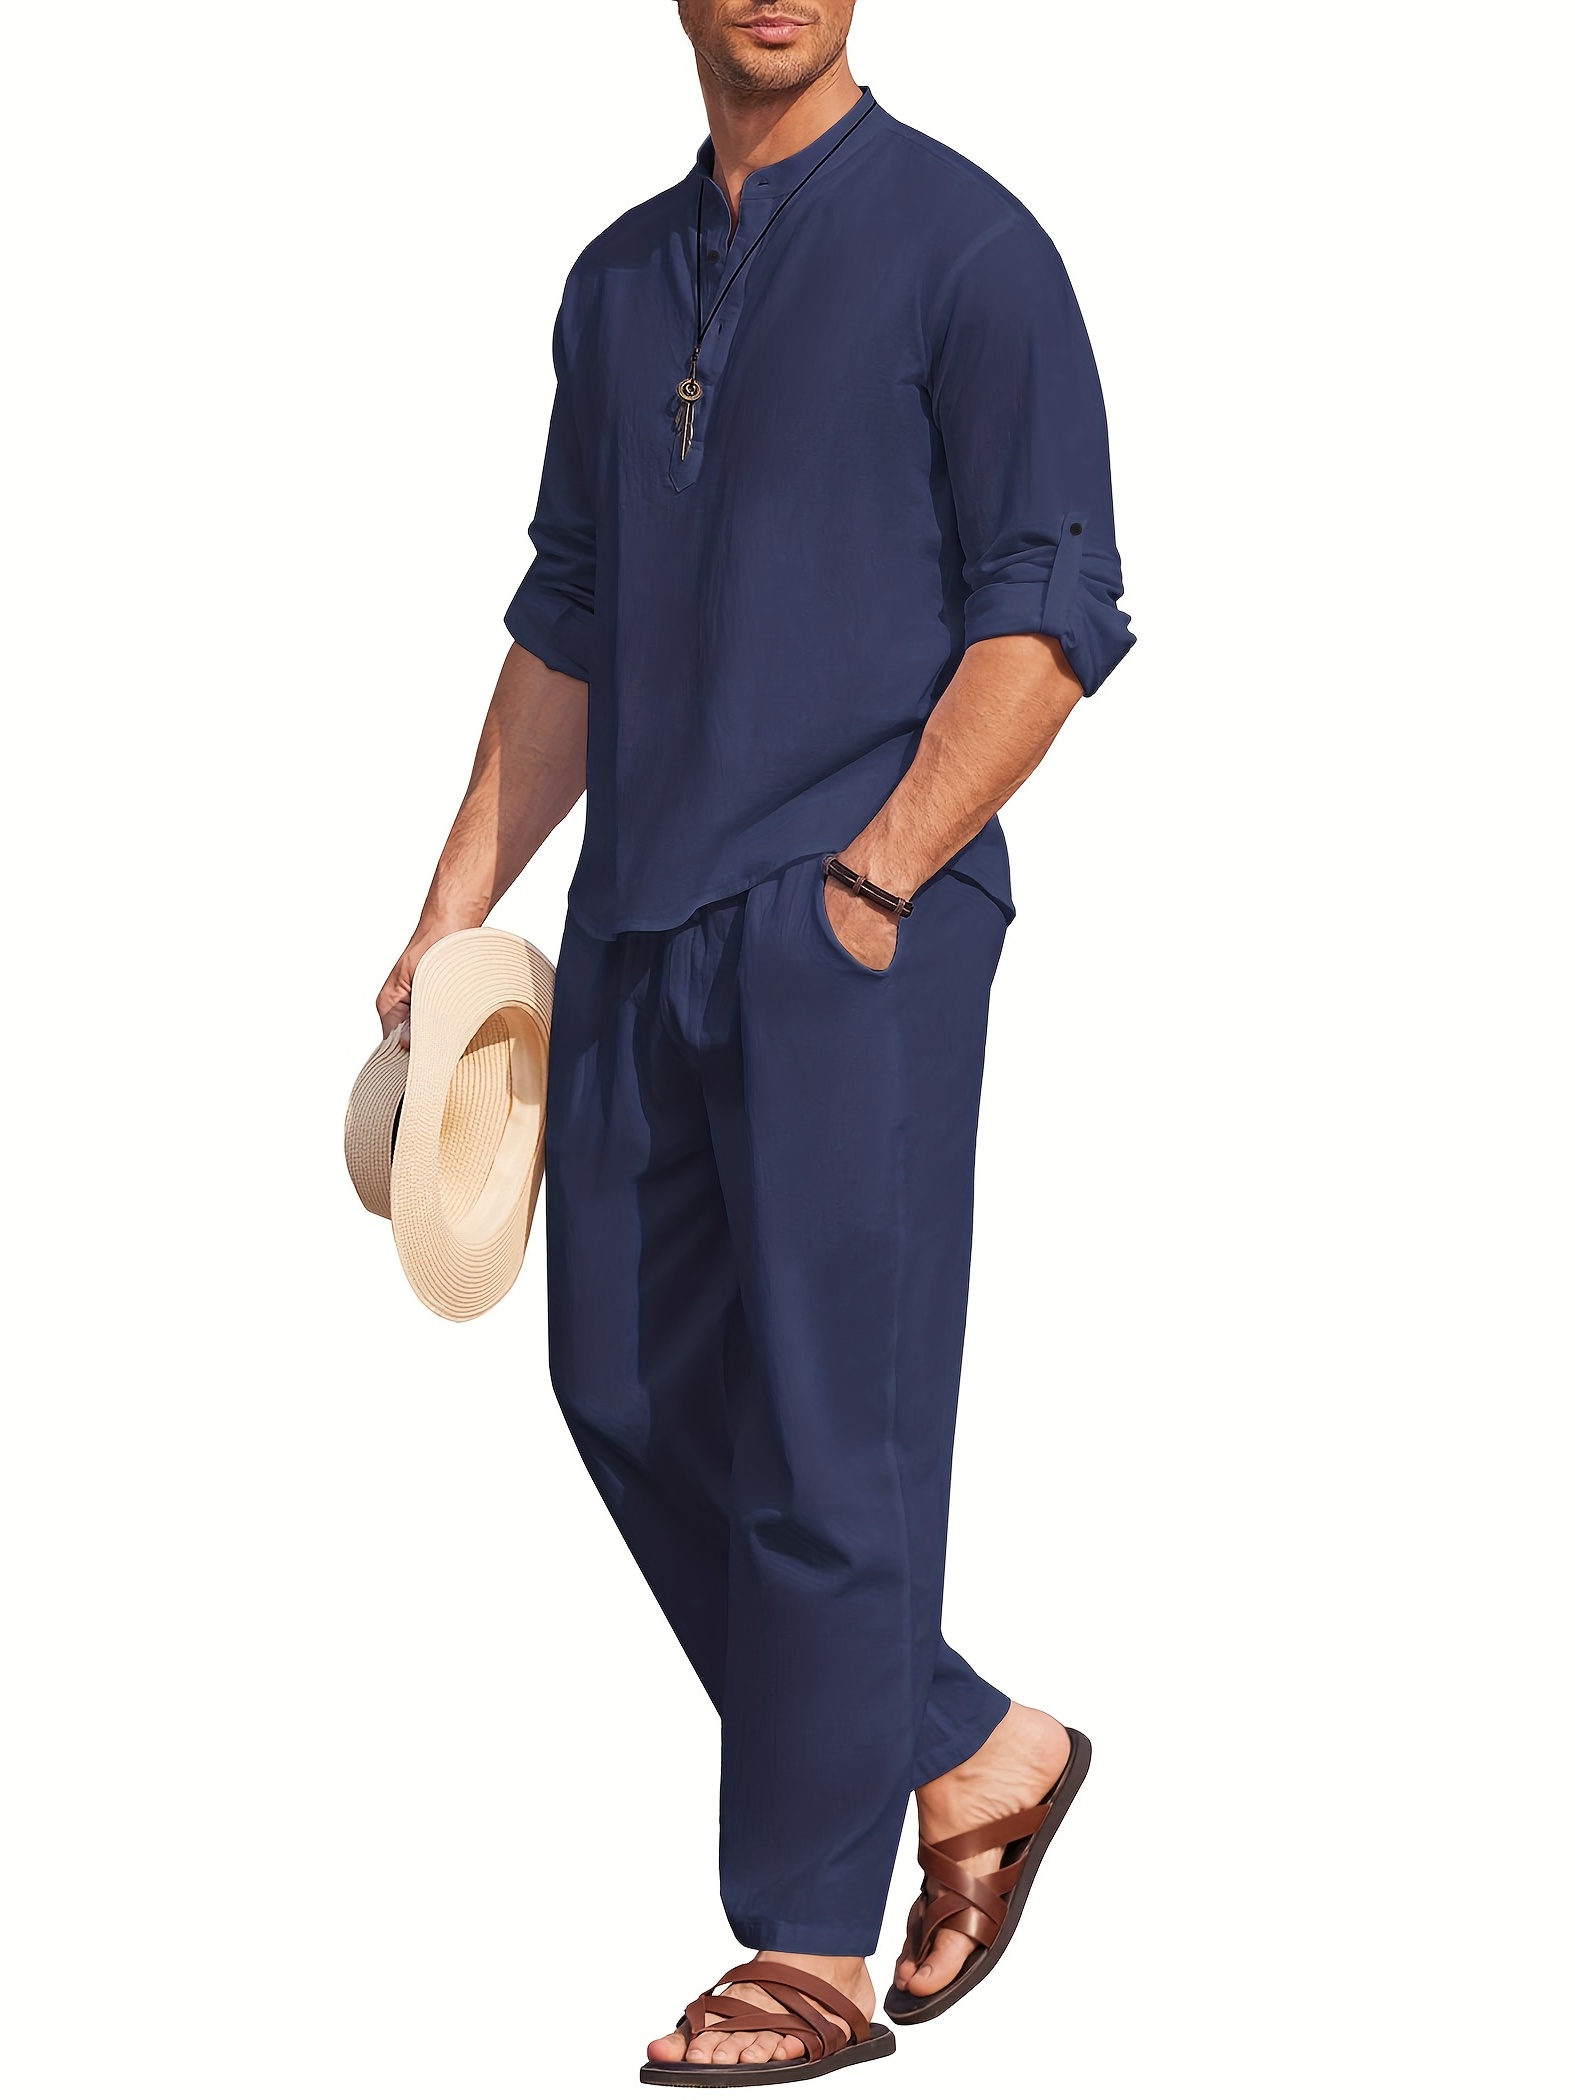 Navy Long Sleeve Shirt with Linen Pants Outfits For Men After 50 (3 ideas &  outfits)